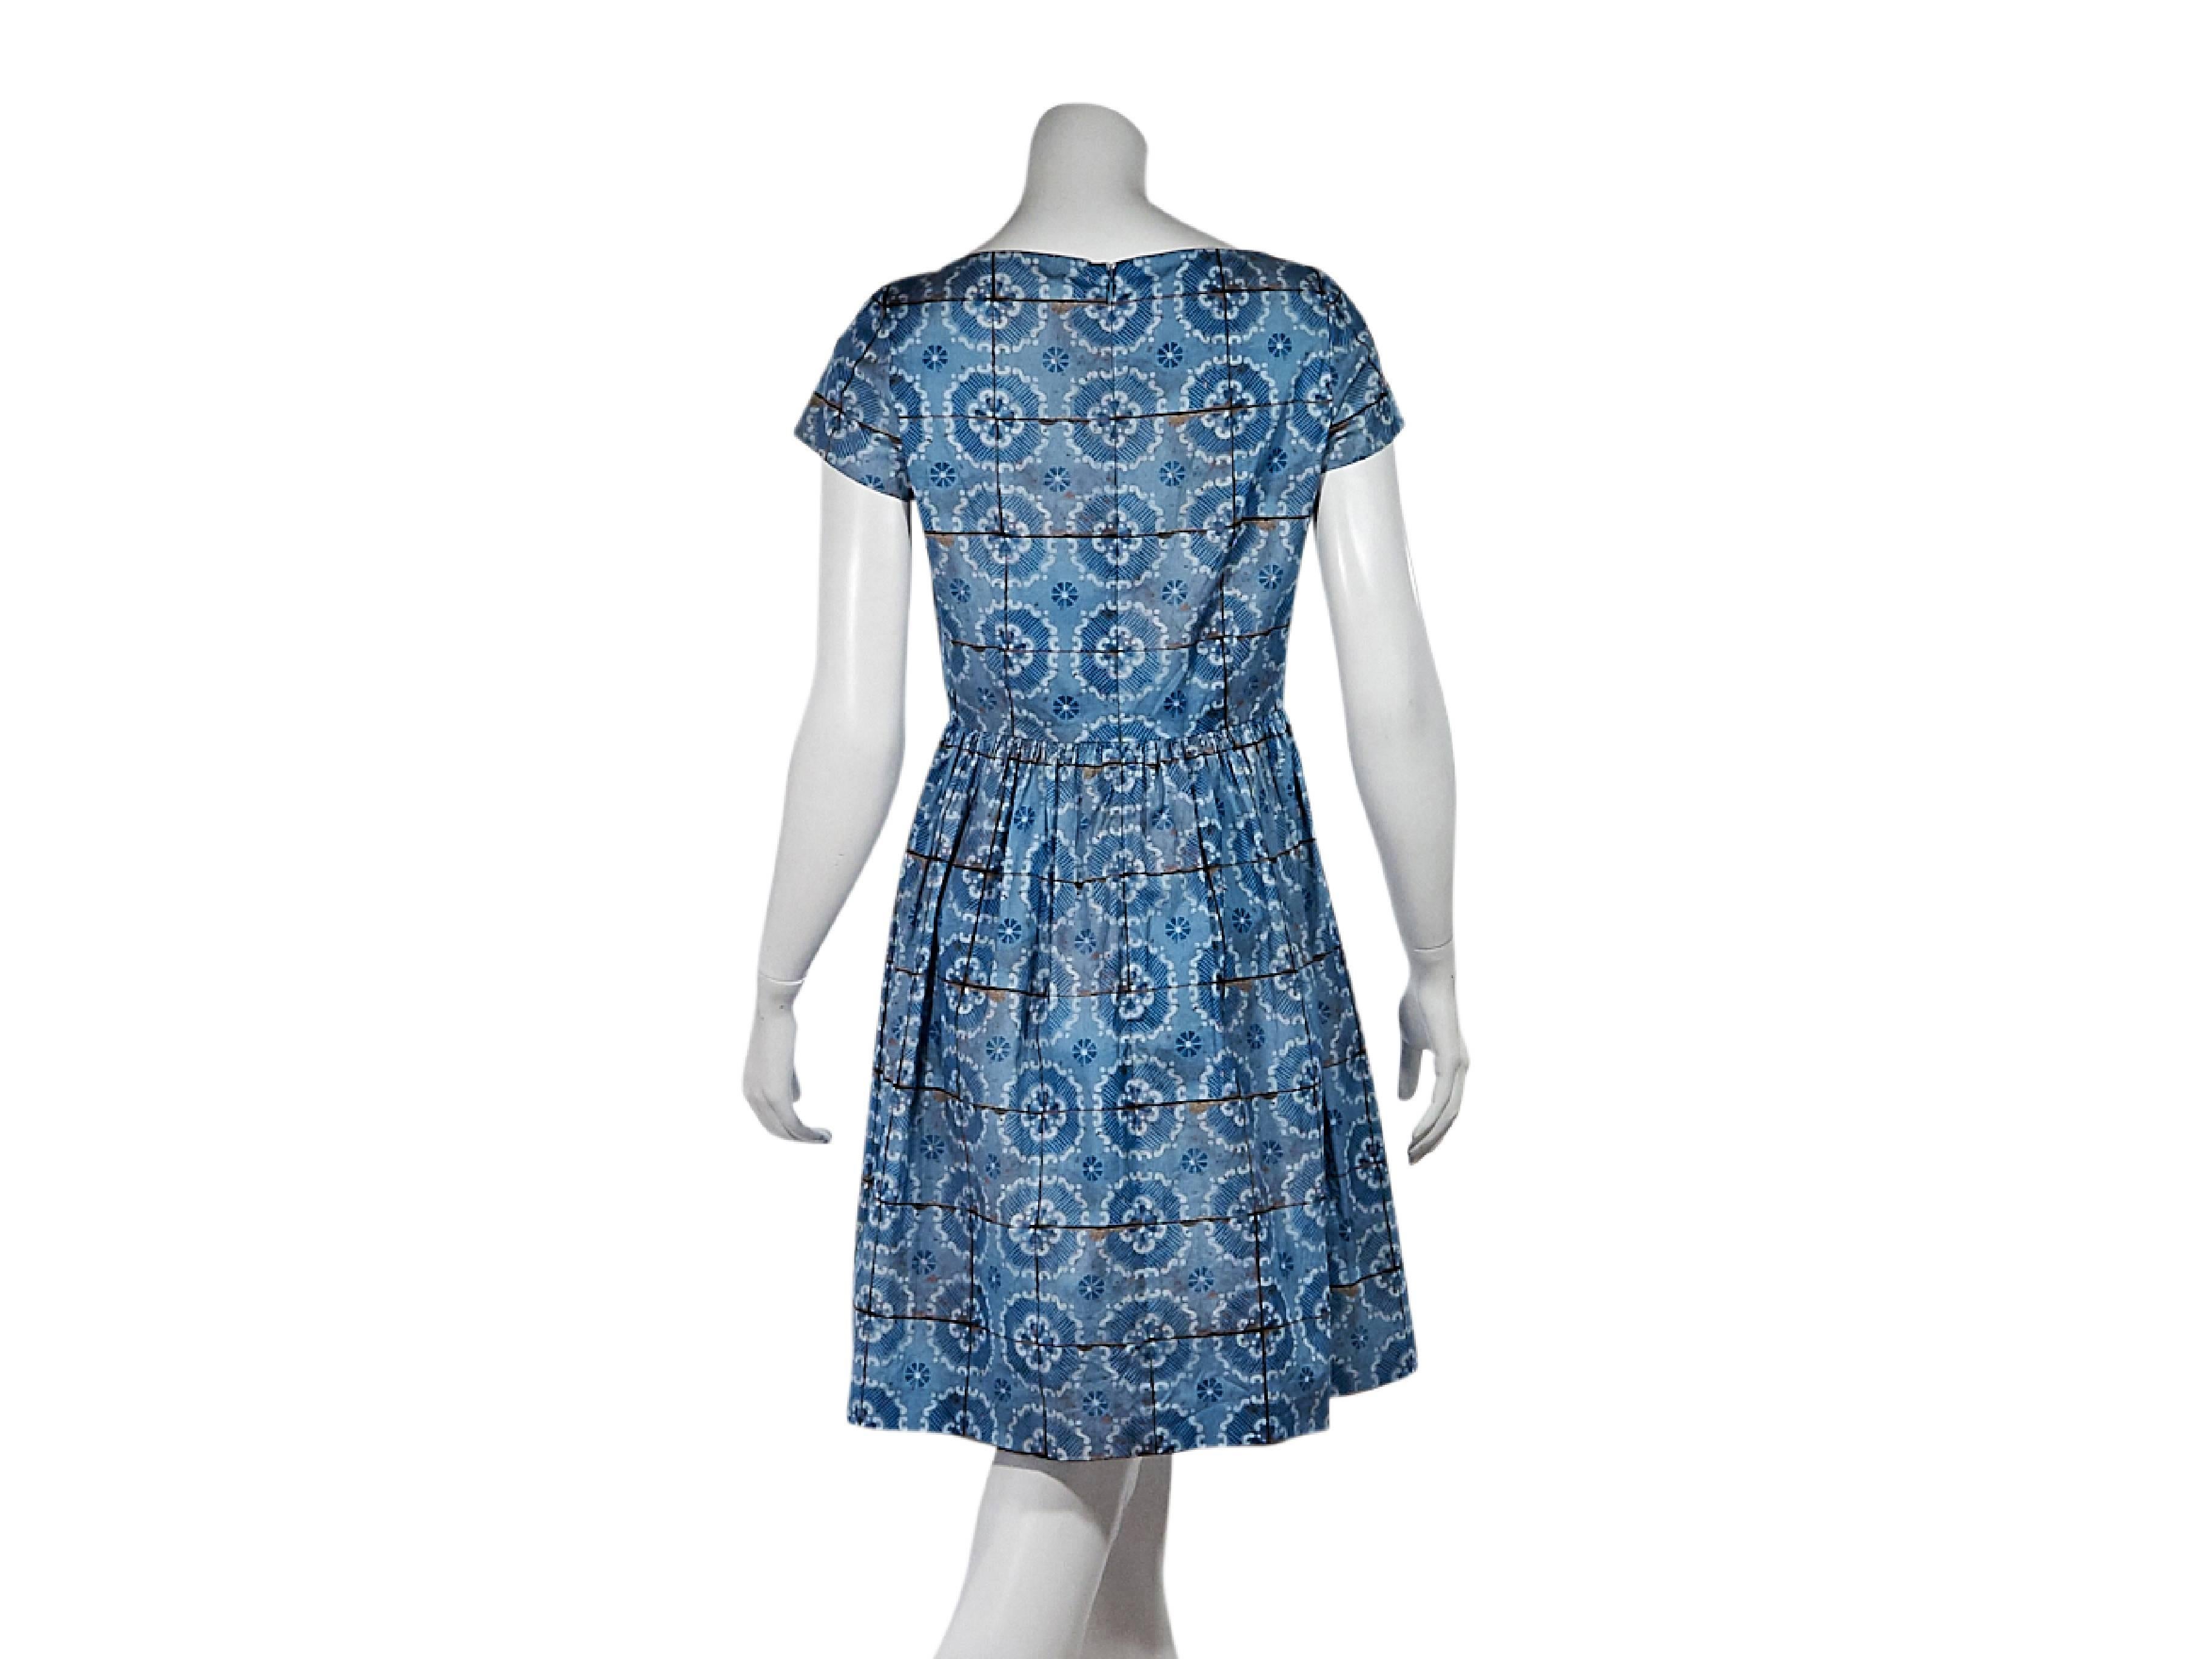 Product details:  Blue floral-printed dress by Prada.  Boatneck.  Short sleeves.  Concealed back zip closure. Size 6 
Condition: Pre-owned. Very good.

Est. Retail $ 598.00